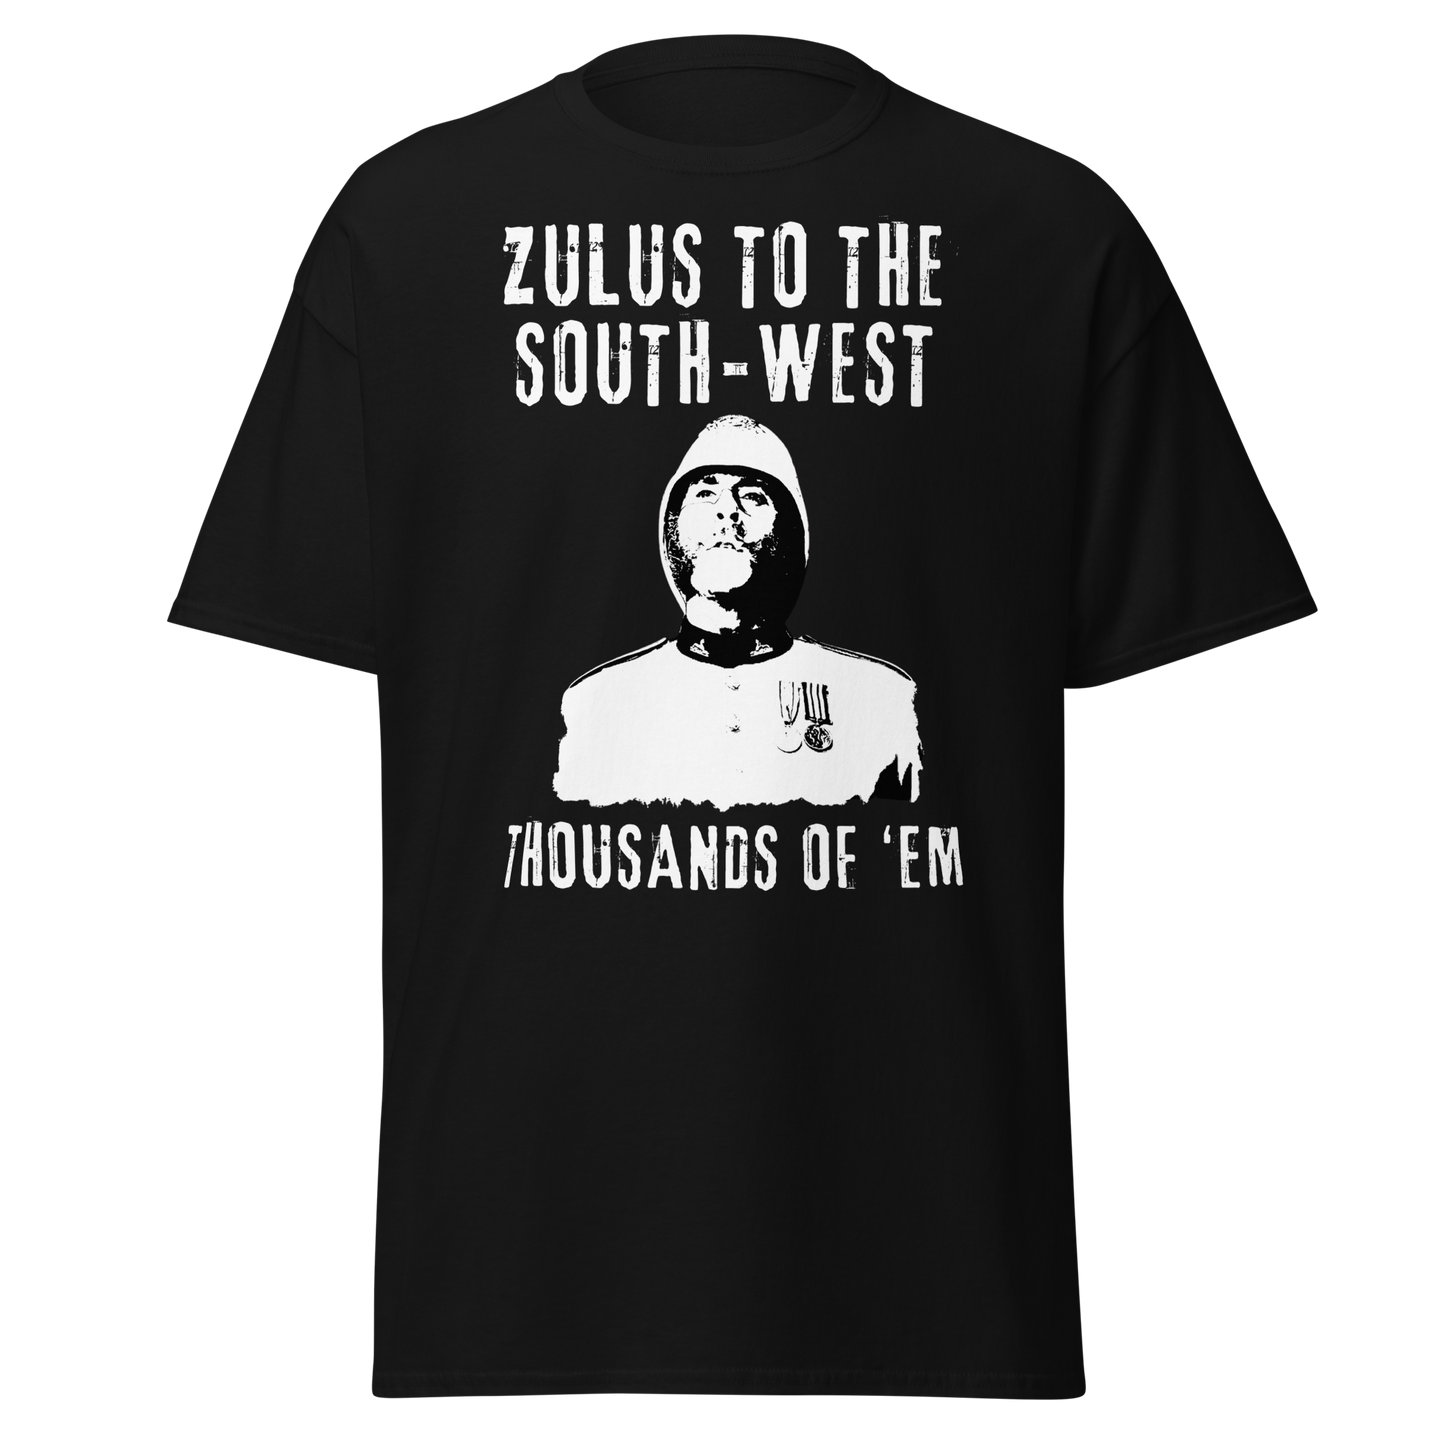 Zulus To The South-West, Thousands of 'Em (t-shirt)